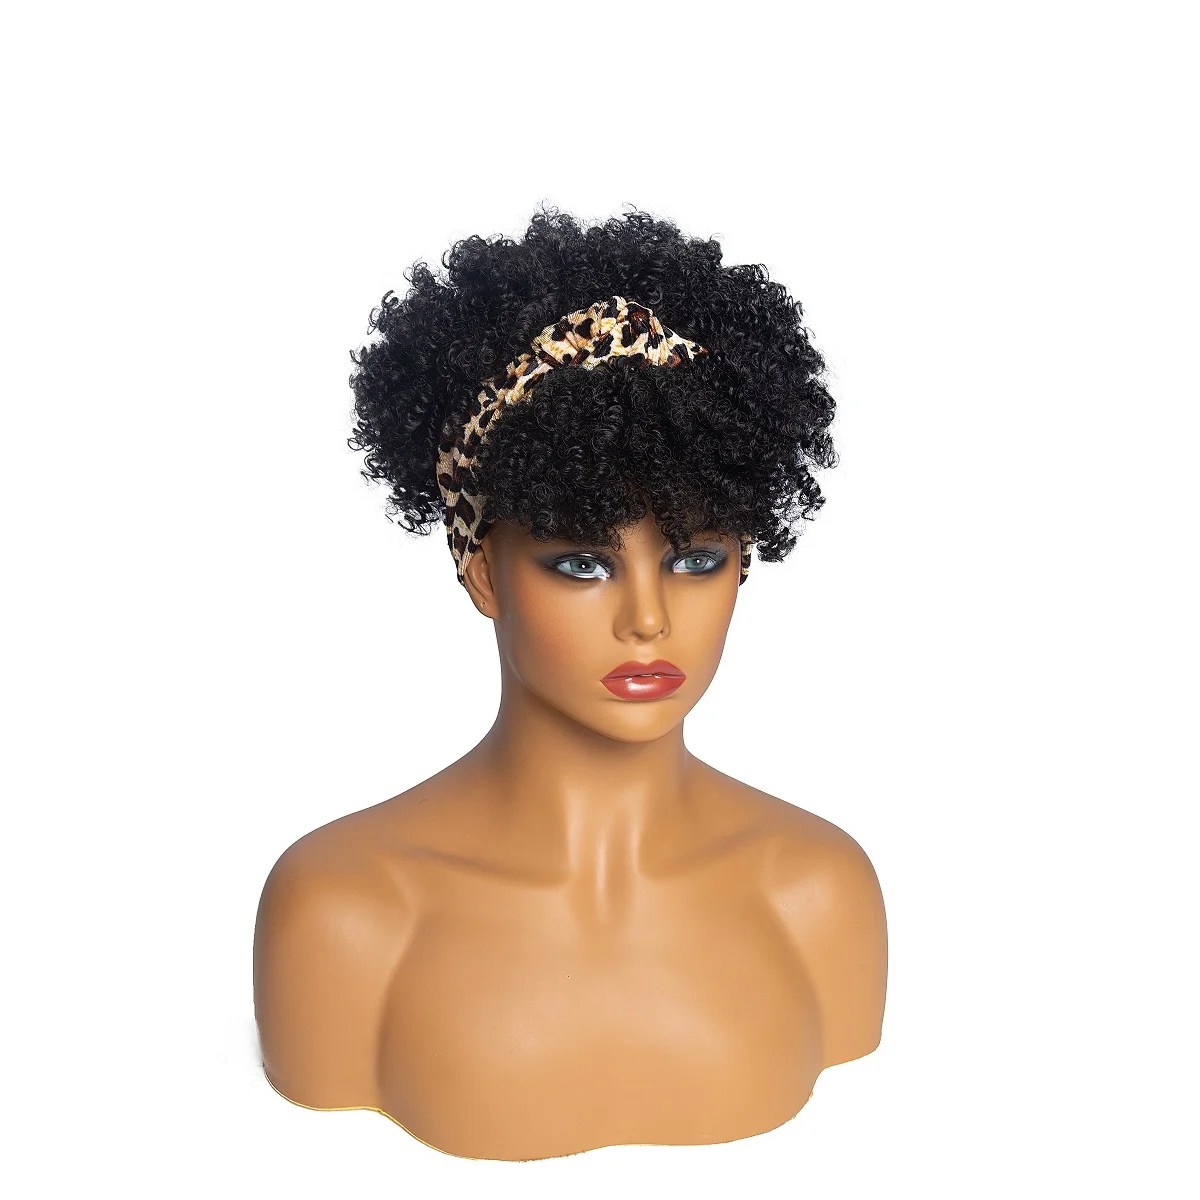 

SC Hot Selling Afro Kinky Curly Head Band Wigs Short Puff Synthetic Black Hair Wig With Leopard Print Turban Head-Wrap Attached